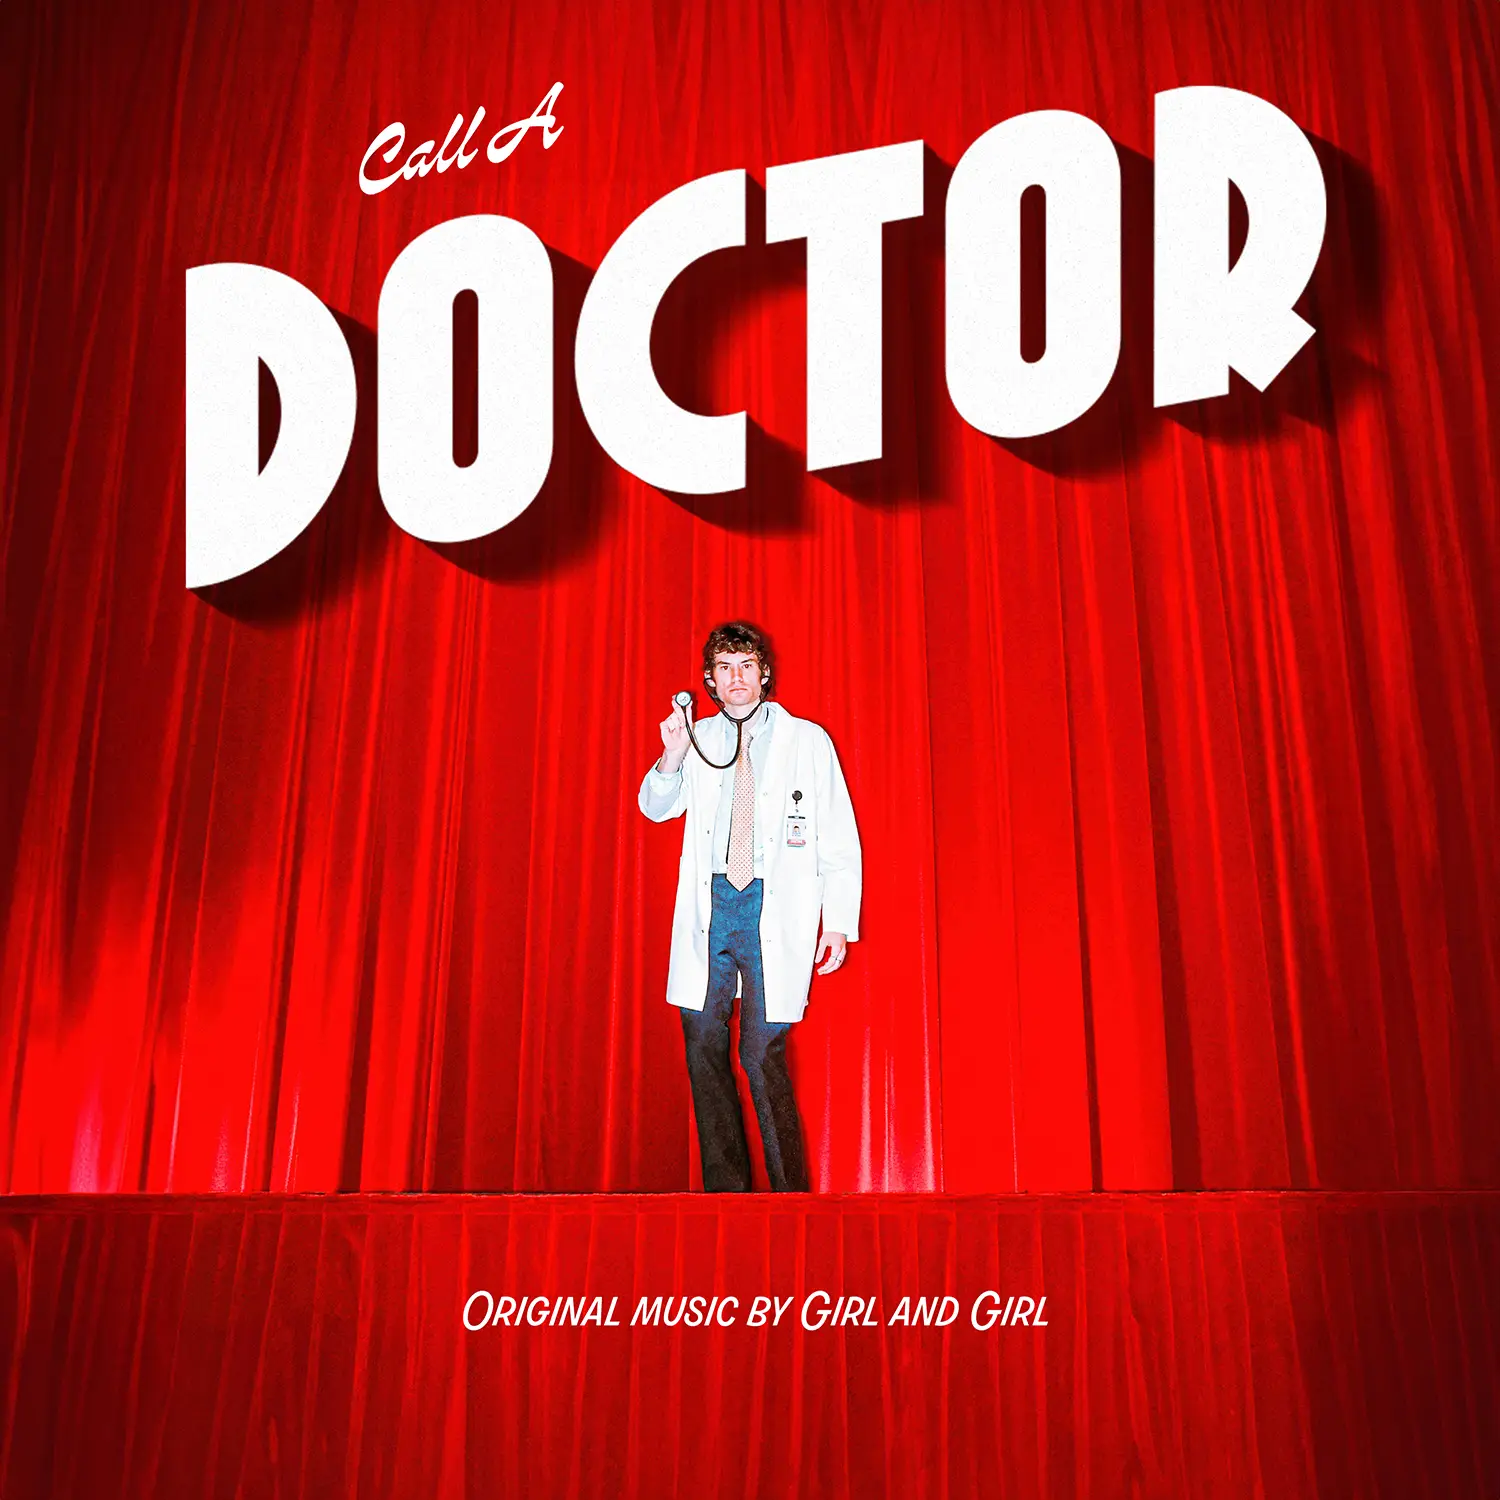 <strong>Girl and Girl - Call A Doctor</strong> (Vinyl LP - white)